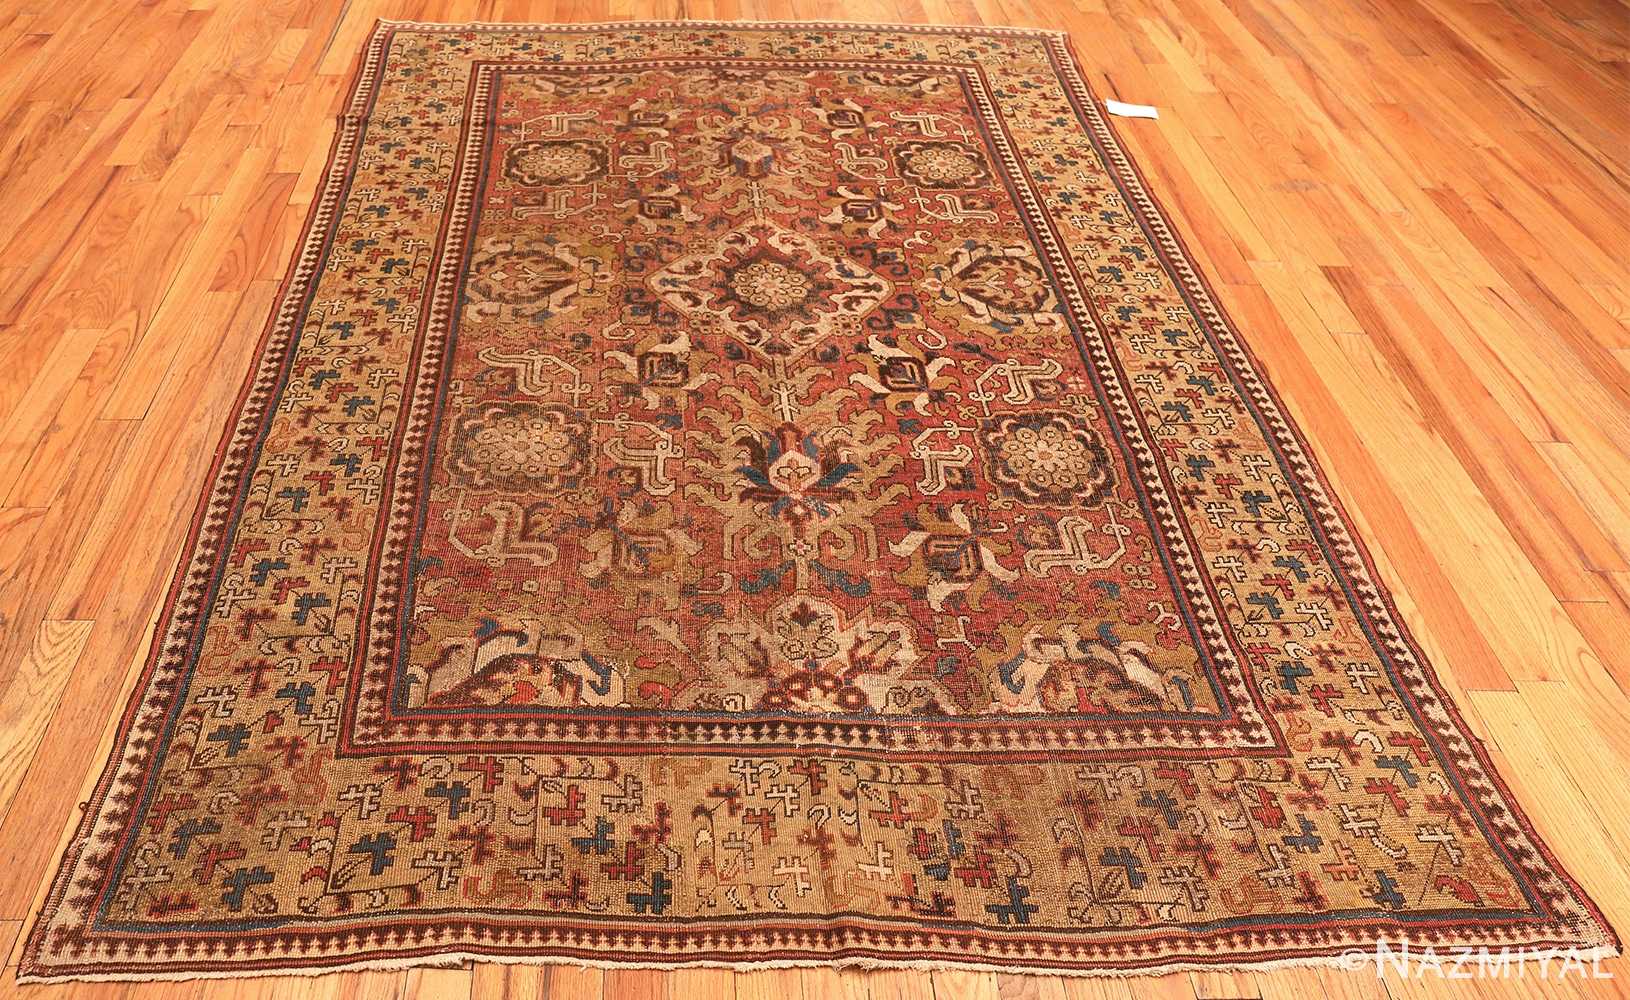 Whole View Of 17th Century Antique Caucasian Kuba Blossom Rug 48855 by Nazmiyal NYC